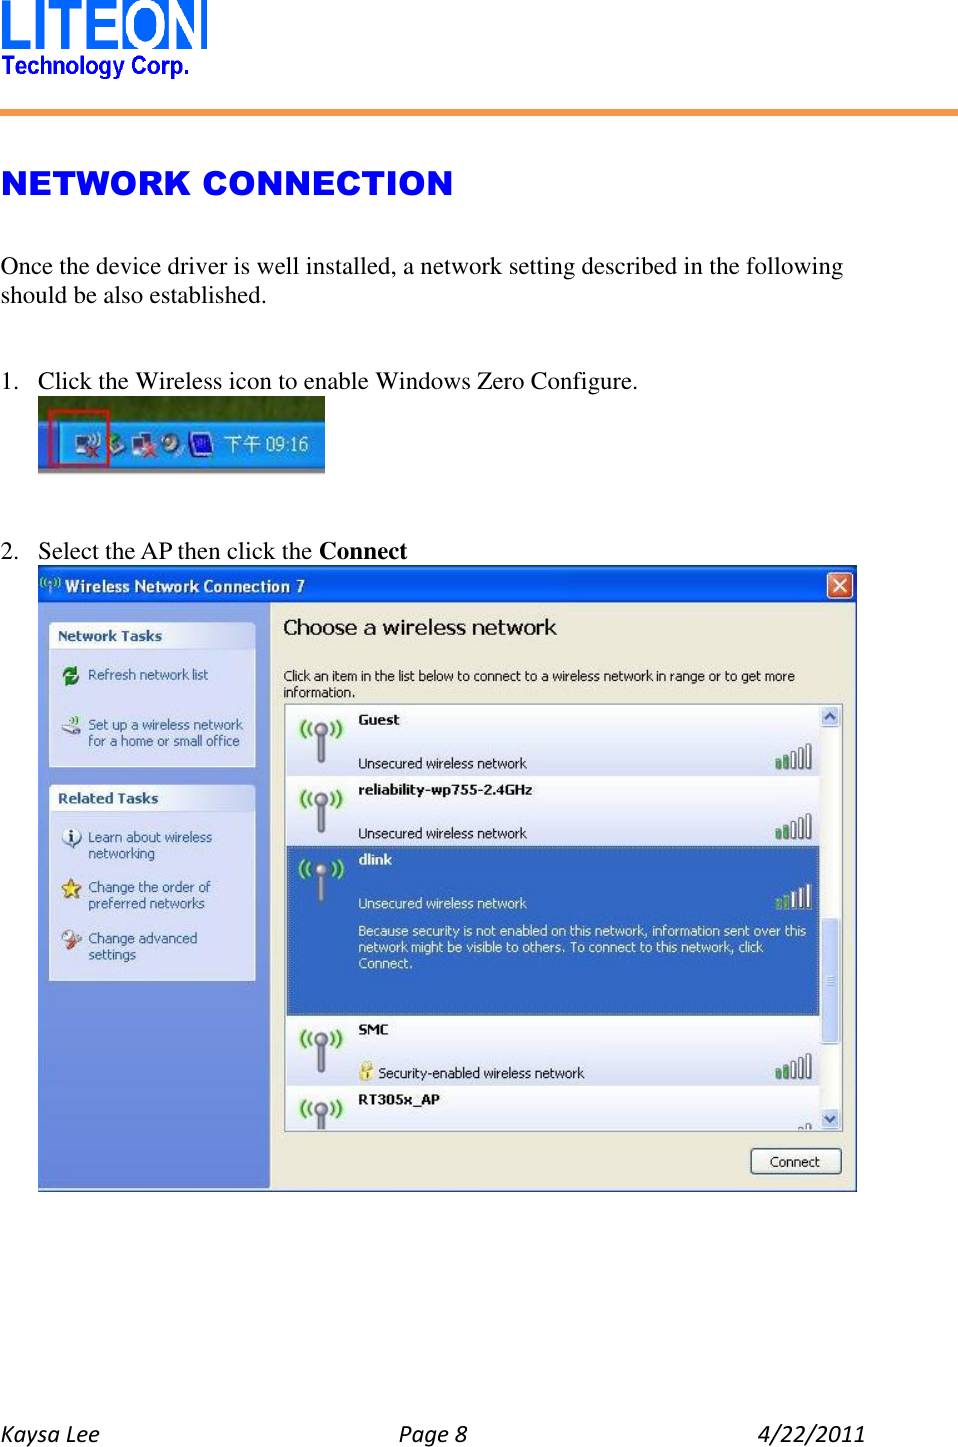   Kaysa Lee  Page 8  4/22/2011    NETWORK CONNECTION  Once the device driver is well installed, a network setting described in the following should be also established.   1. Click the Wireless icon to enable Windows Zero Configure.    2. Select the AP then click the Connect  